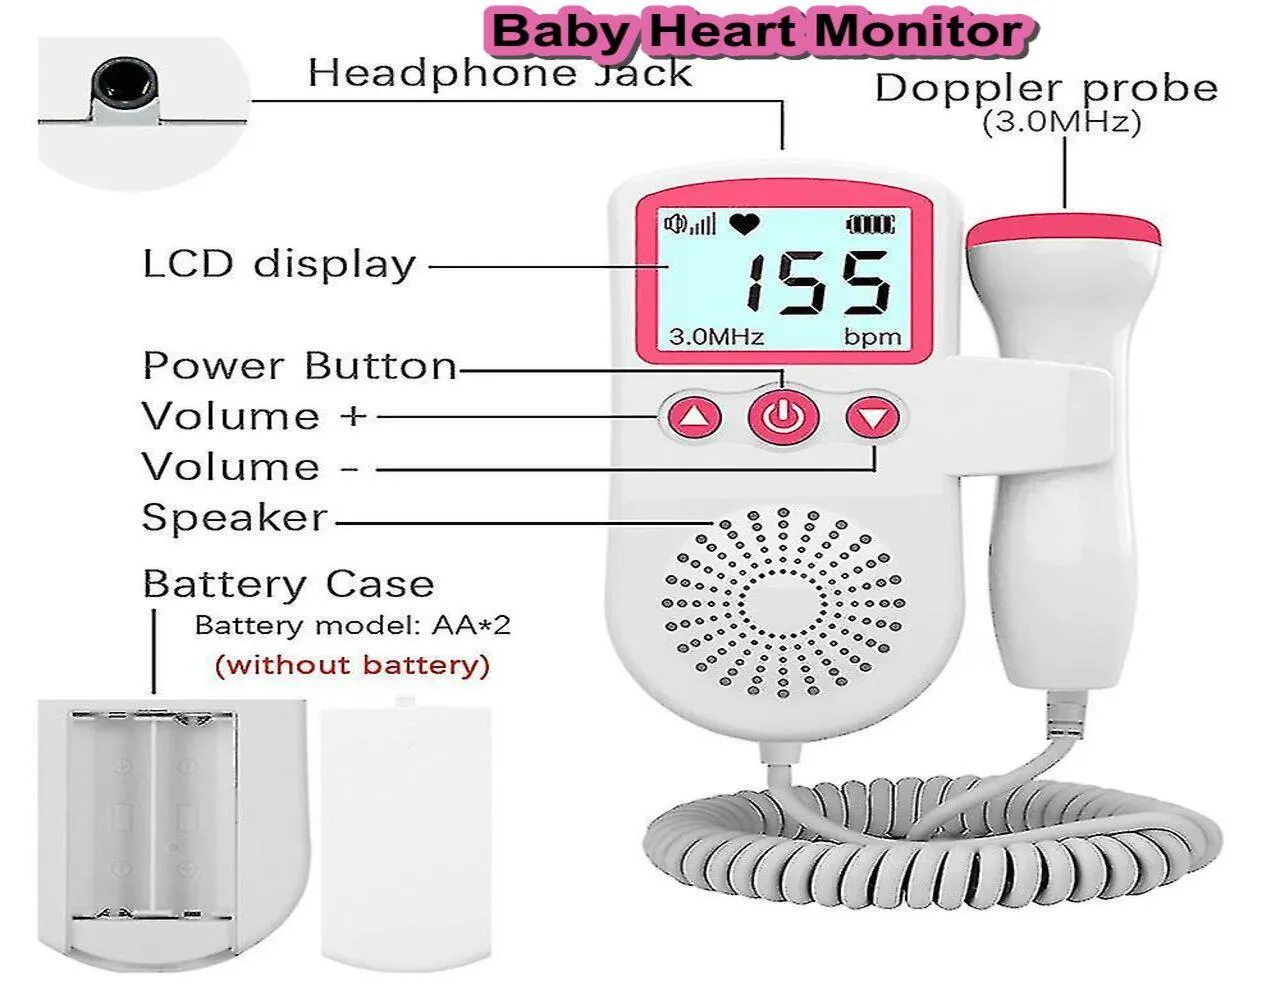 Baby Heart Monitor: Baby heartbeat 147 boy or girl, Best Results Measures Heartbeat 24